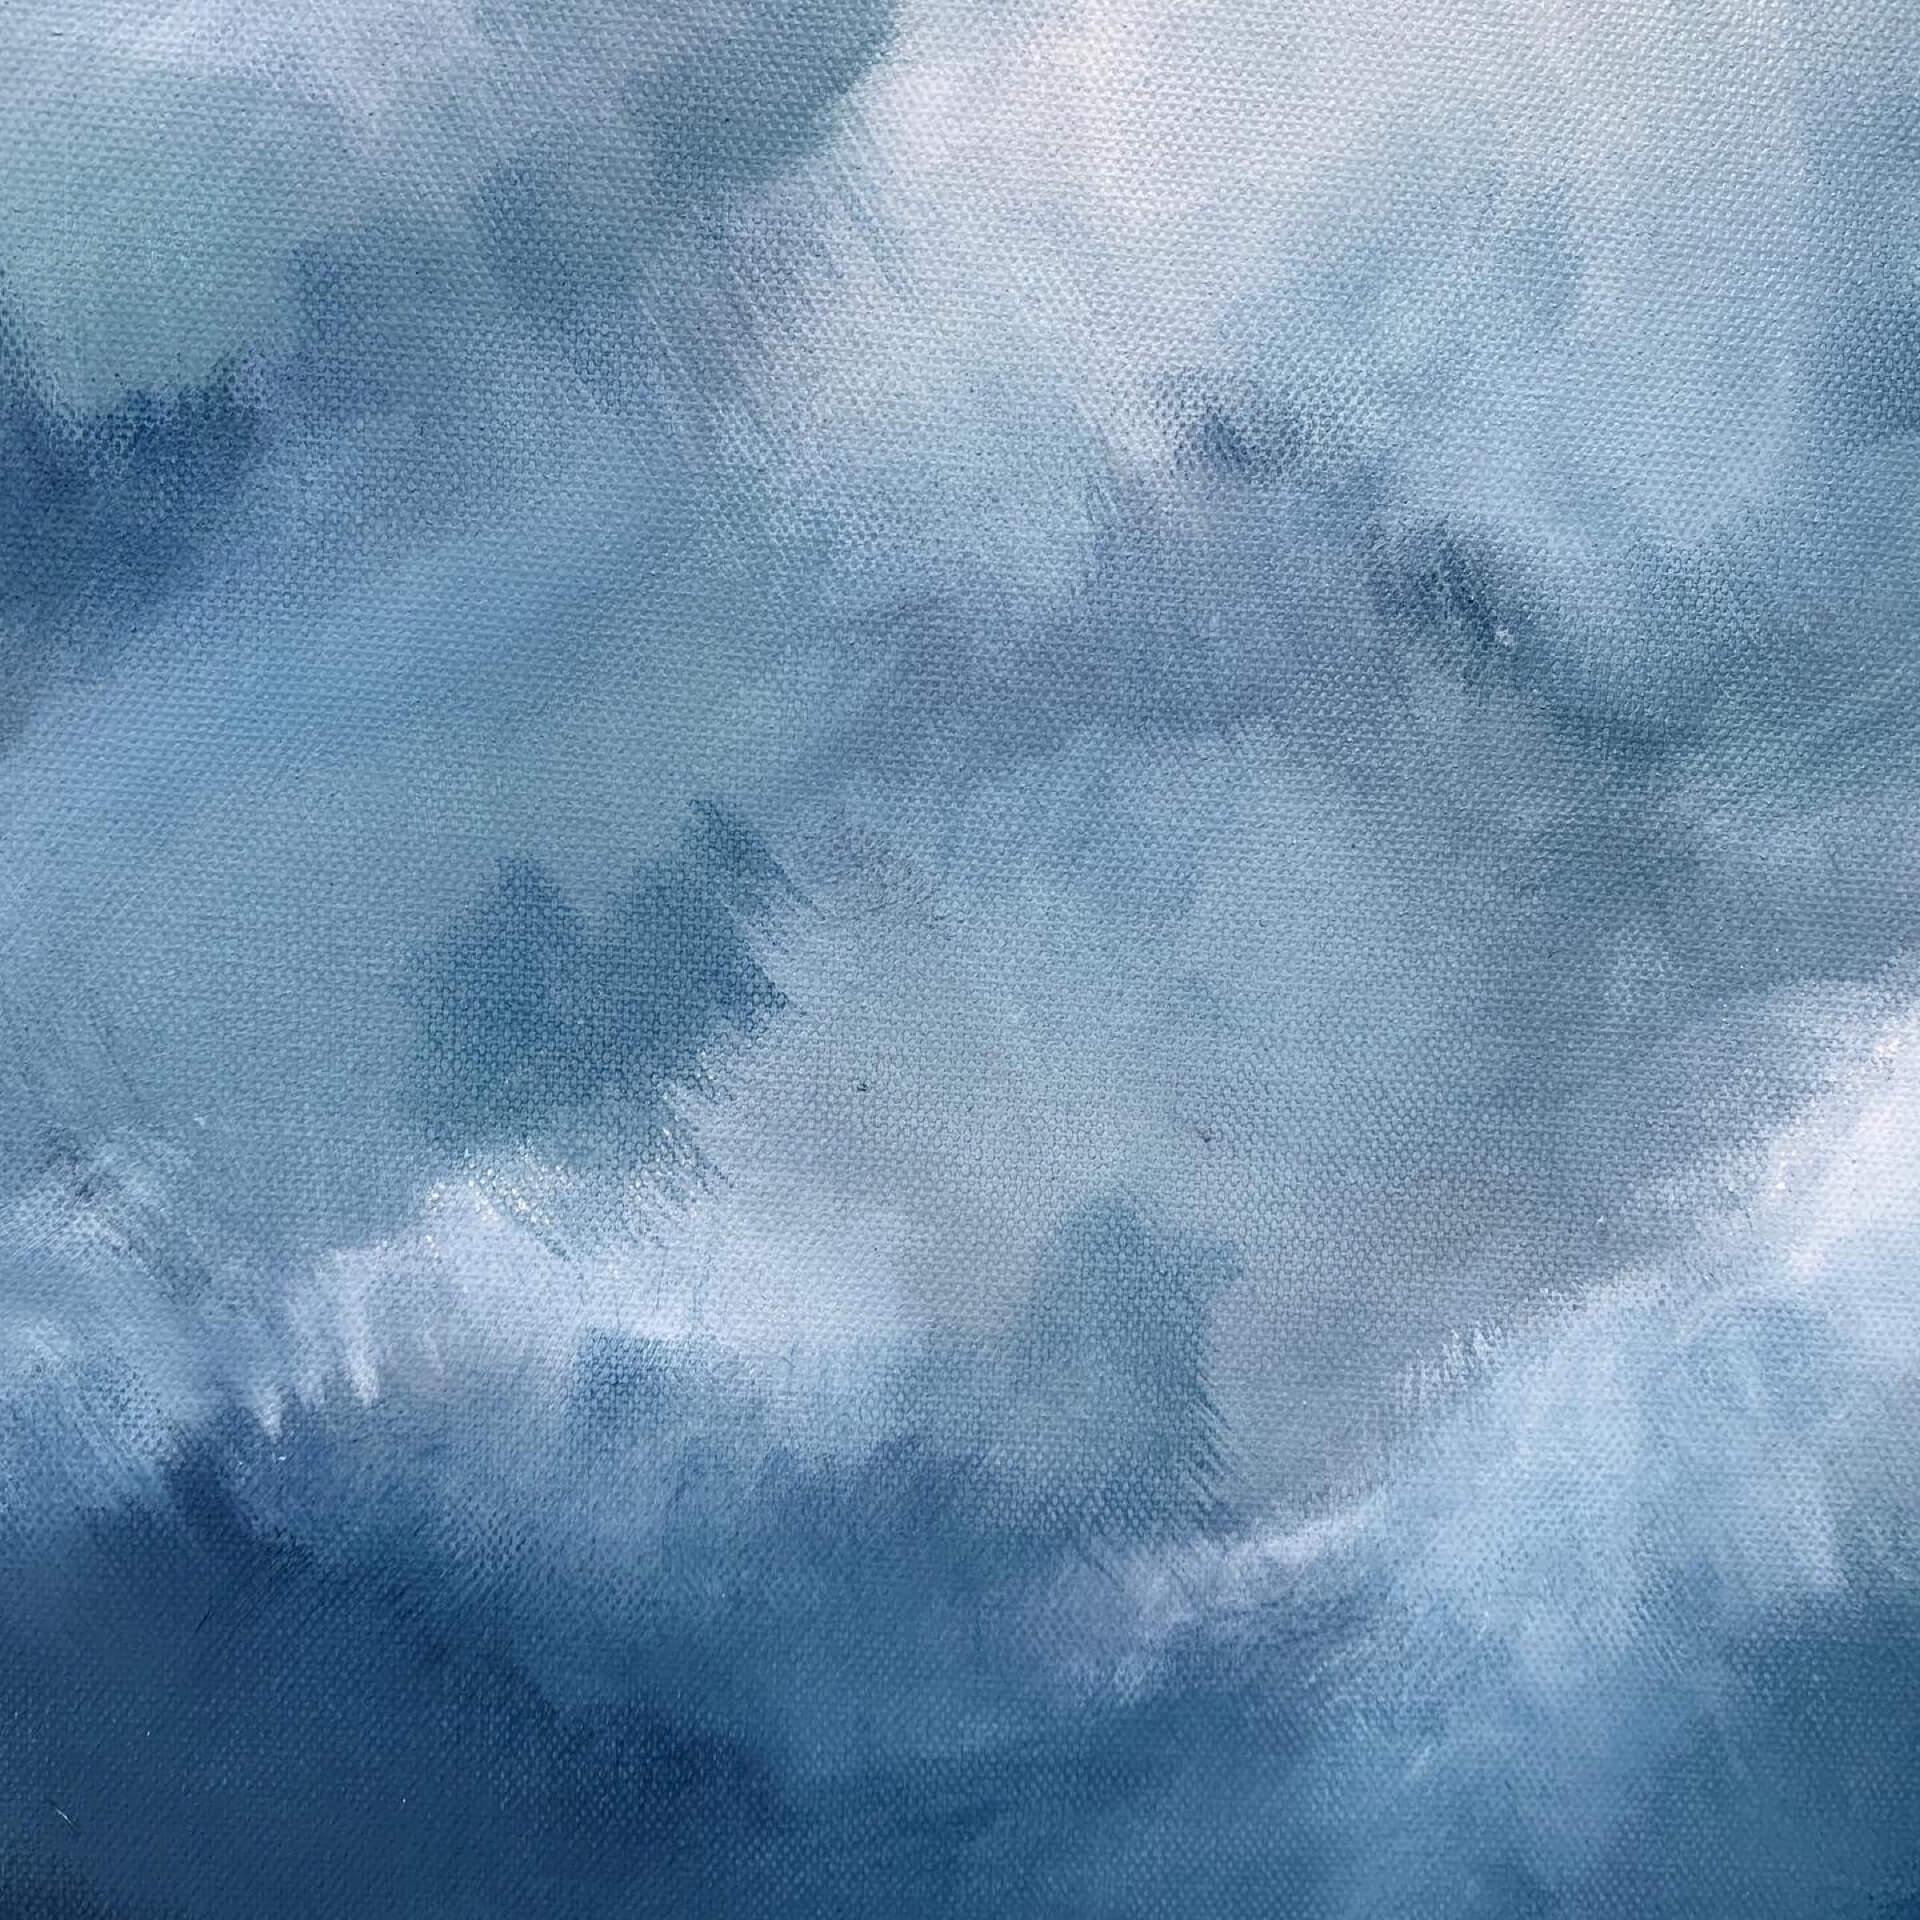 Listening to the Storm - Painting by Christina Sadler